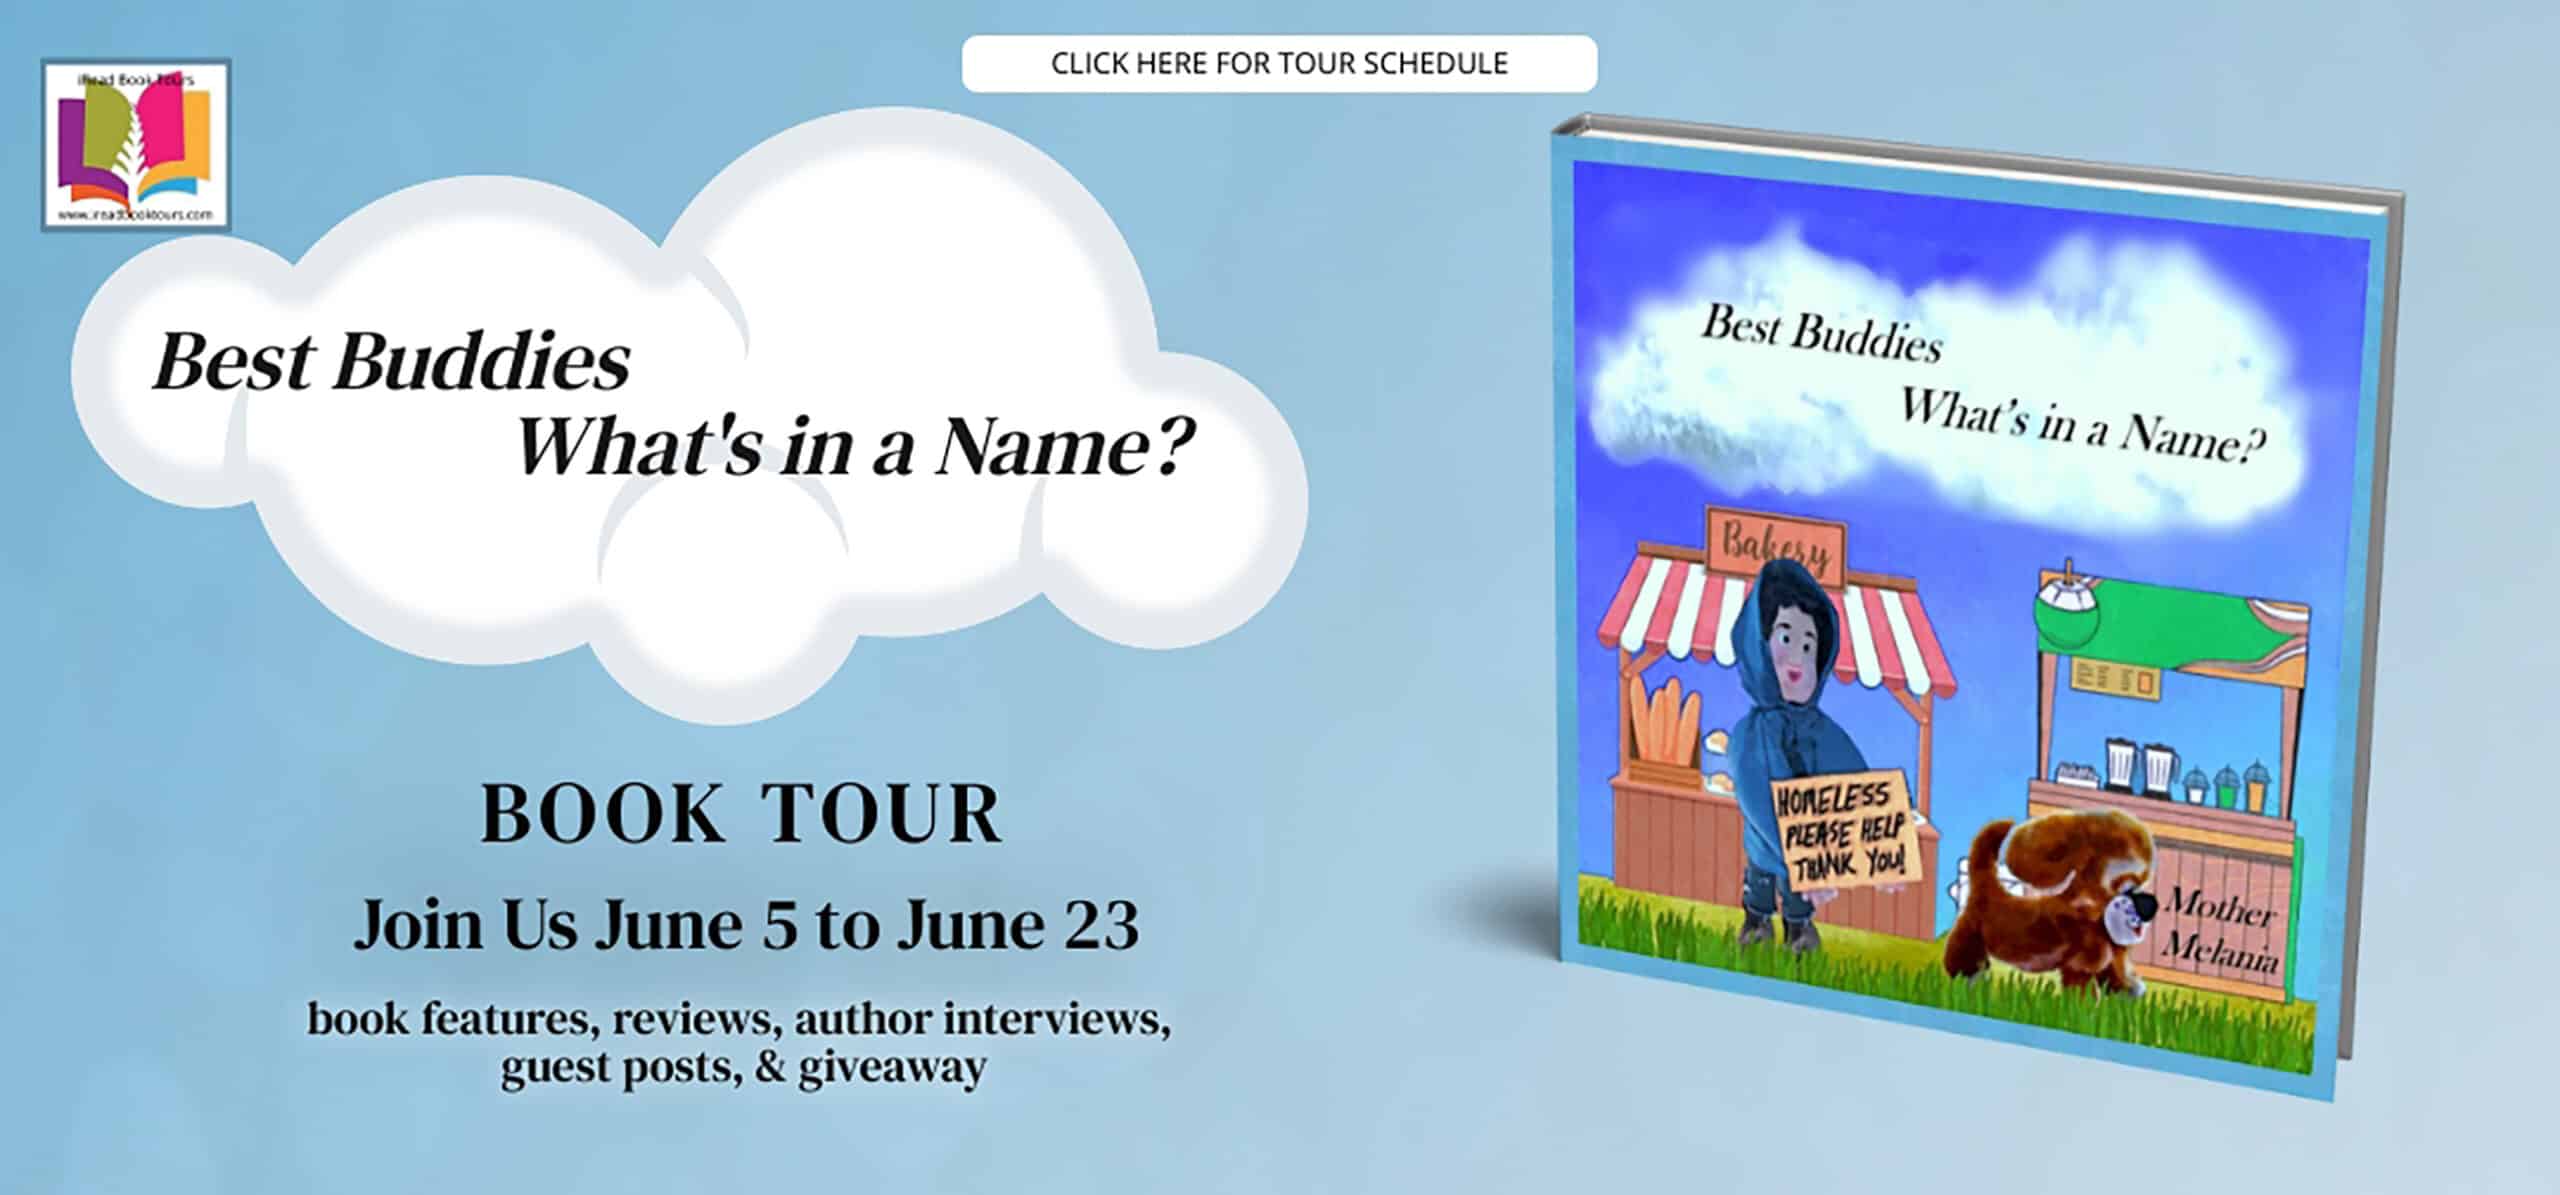 Best Buddies: What's in a Name? by Mother Melania Salem | 4.5 Star Children's Book Review ~ Author Guest Post ~ Giveaway